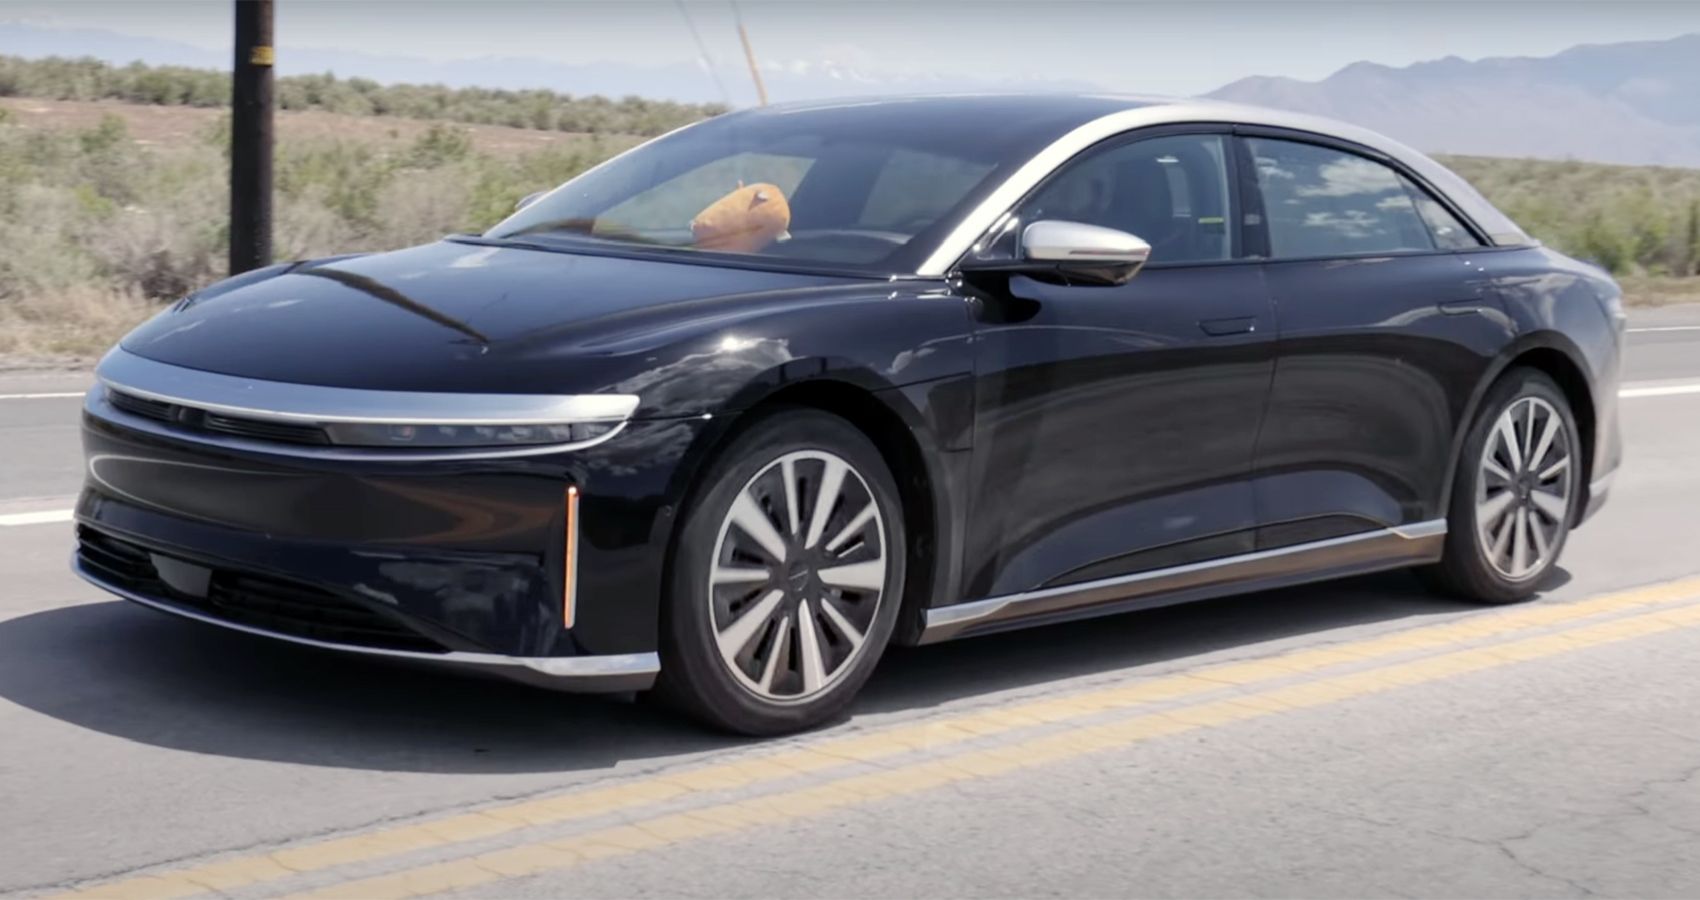 A Lucid Air Dream Edition Travels 687 Miles Before The Battery Dies